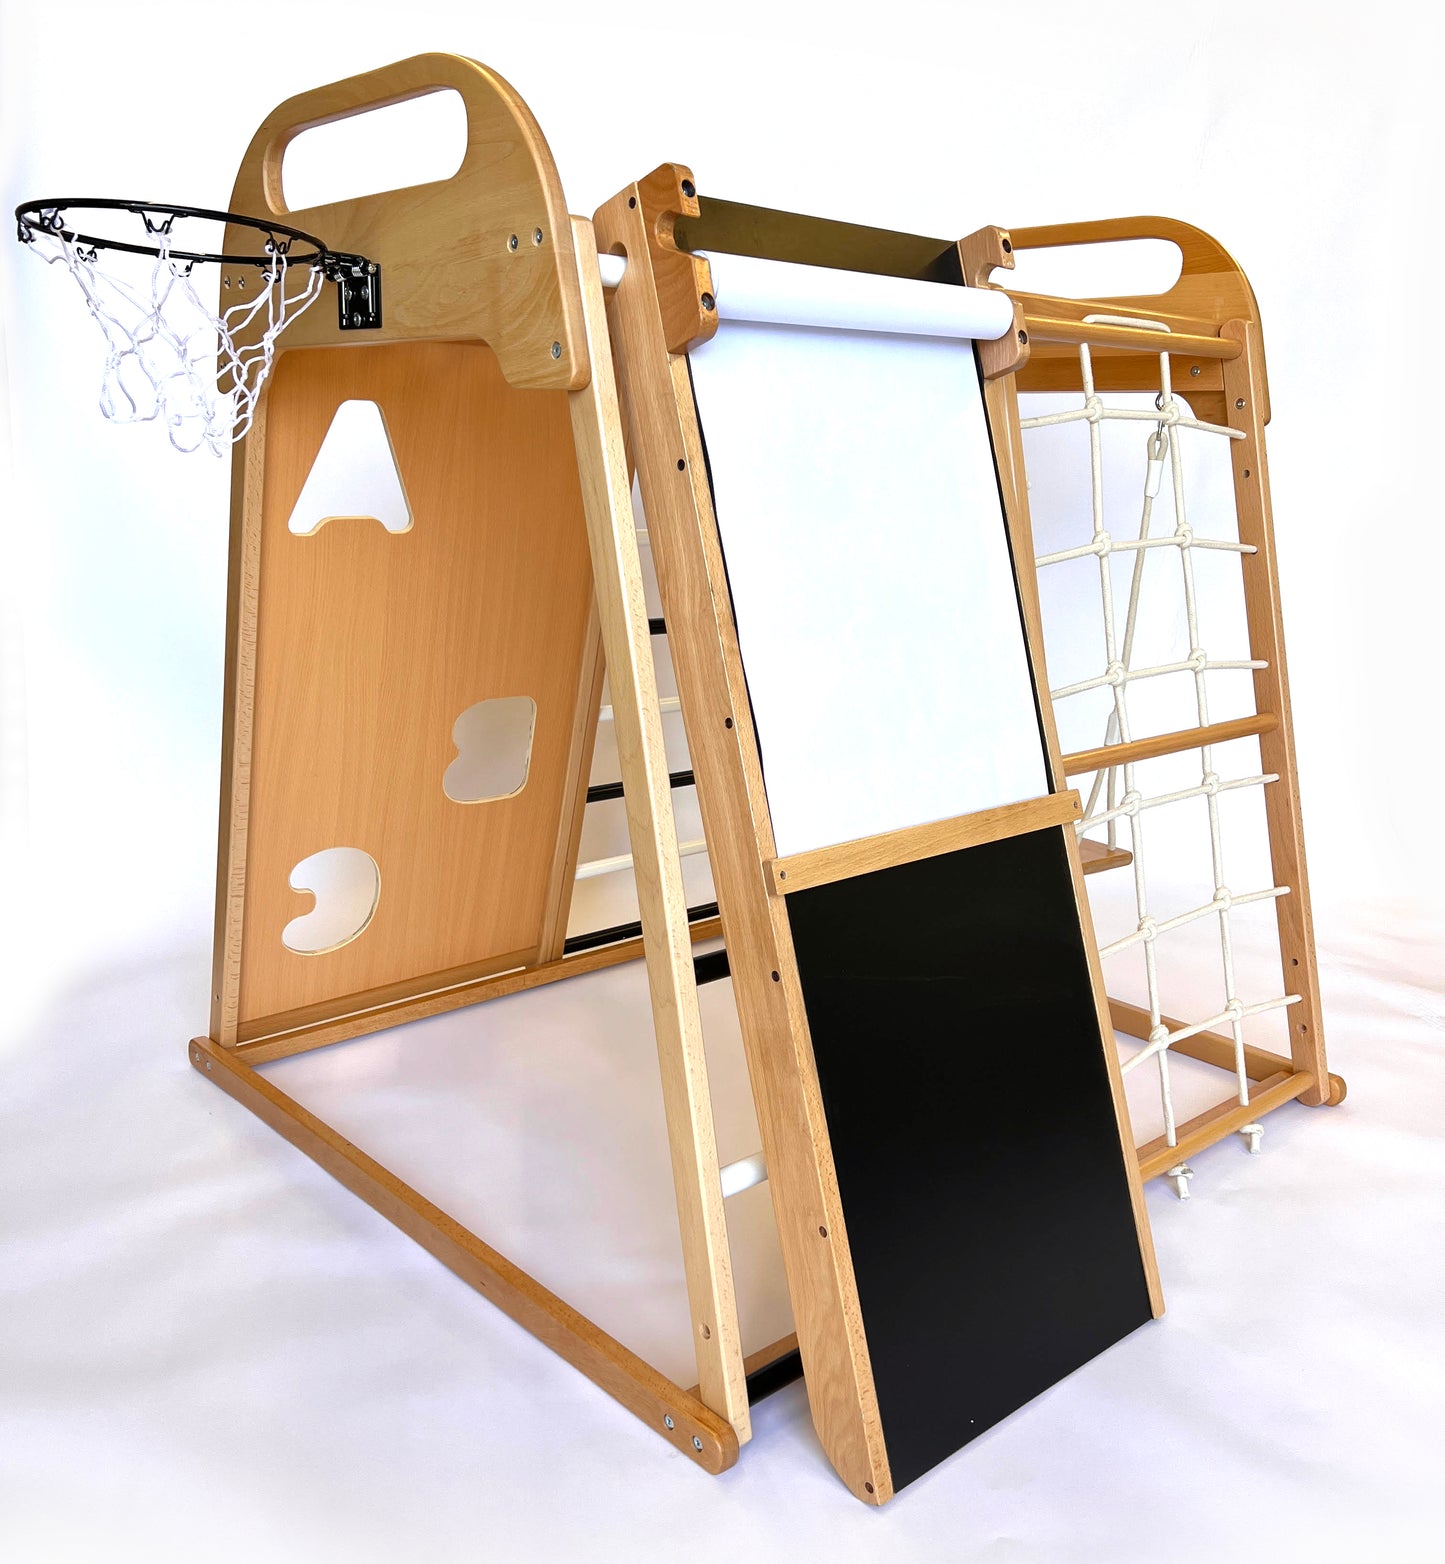 Wooden Indoor Playground Climber for Kids, Jungle Gym Toy Playset for Toddlers. Chalkboard/ Slide,Climbing Wall, Swing,Rope Climber,Monkey Bars,Ladder,Basketball Hoop